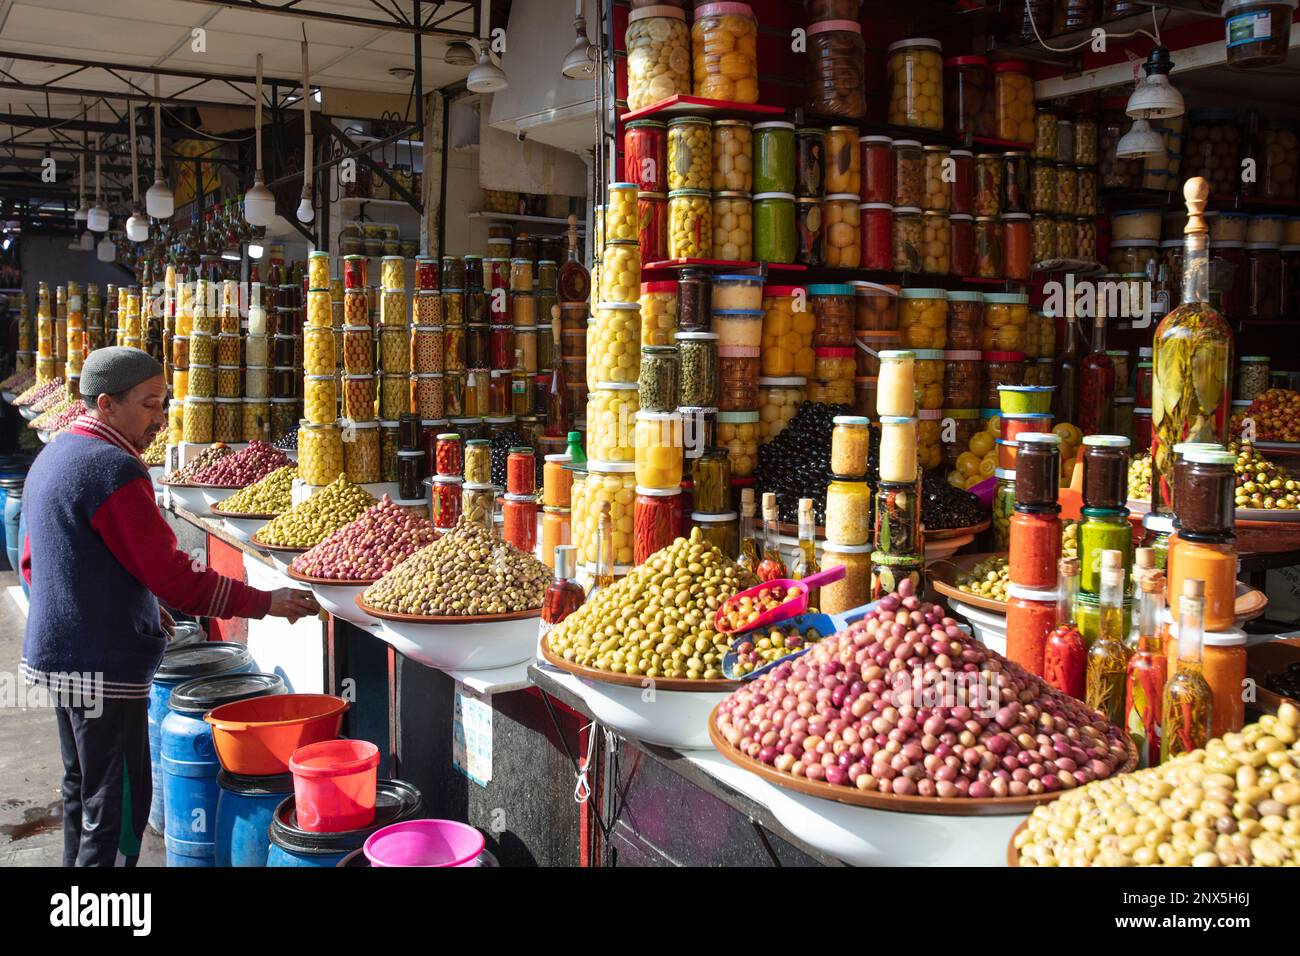 Marrakech, Morocco – February 25, 2023: A man is cleaning his counter with olive and pickled vegetables and fruit in glass jars Stock Photo